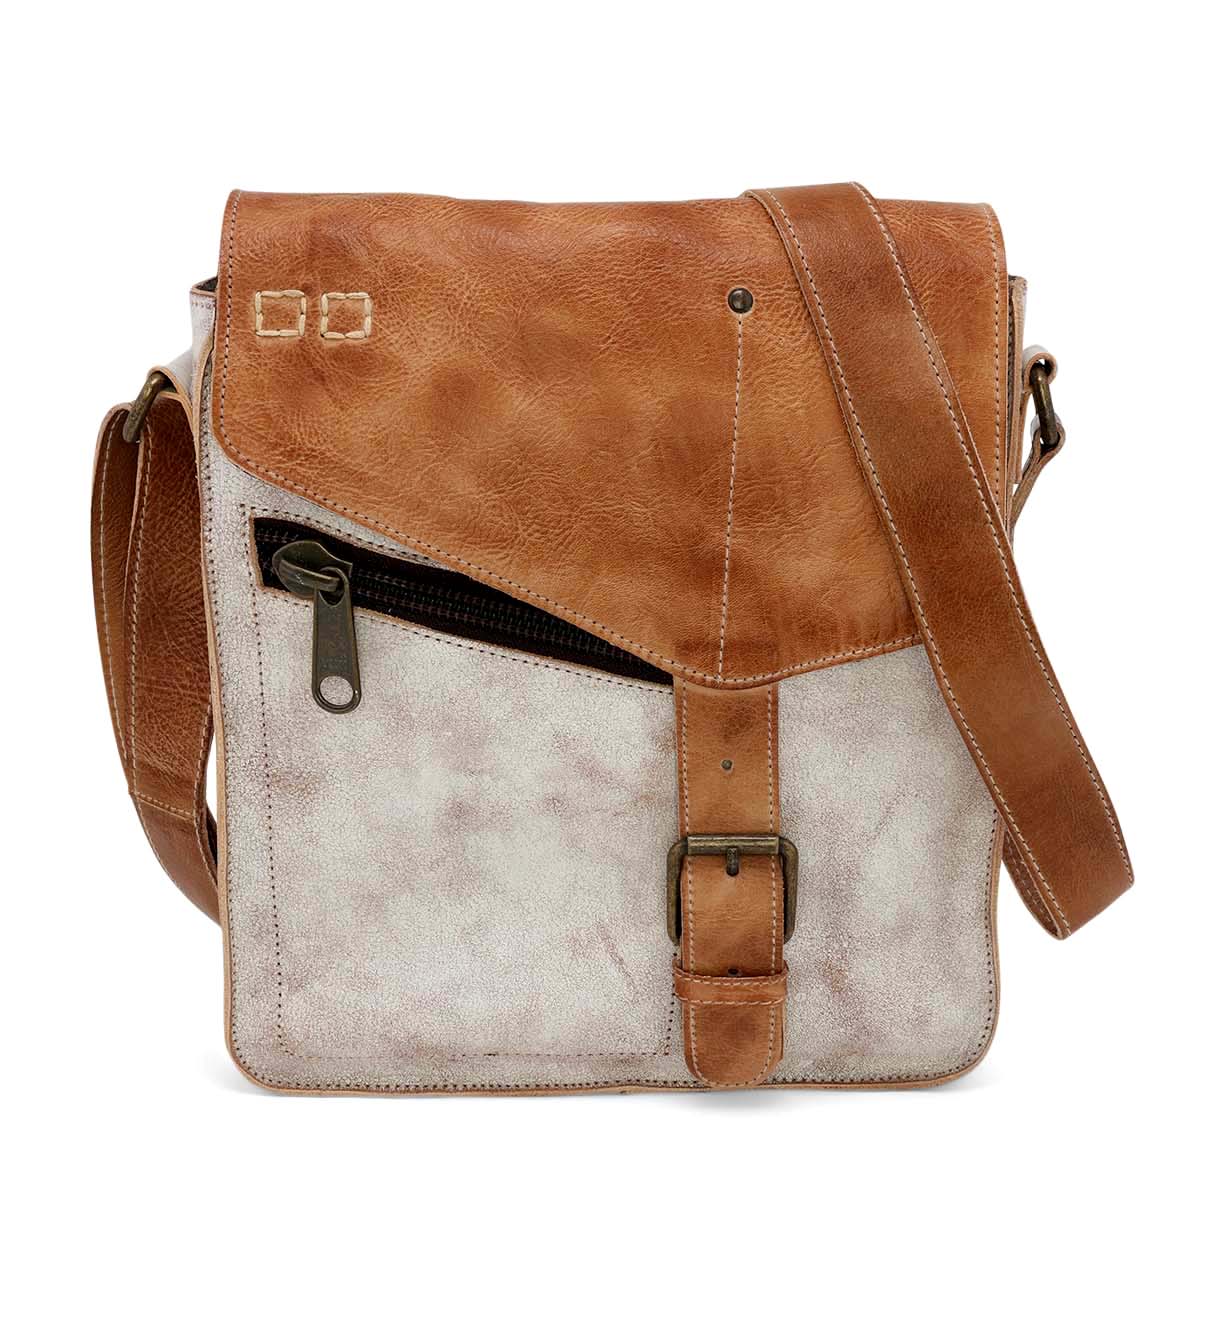 A brown and white Venice Beach leather messenger bag by Bed Stu.